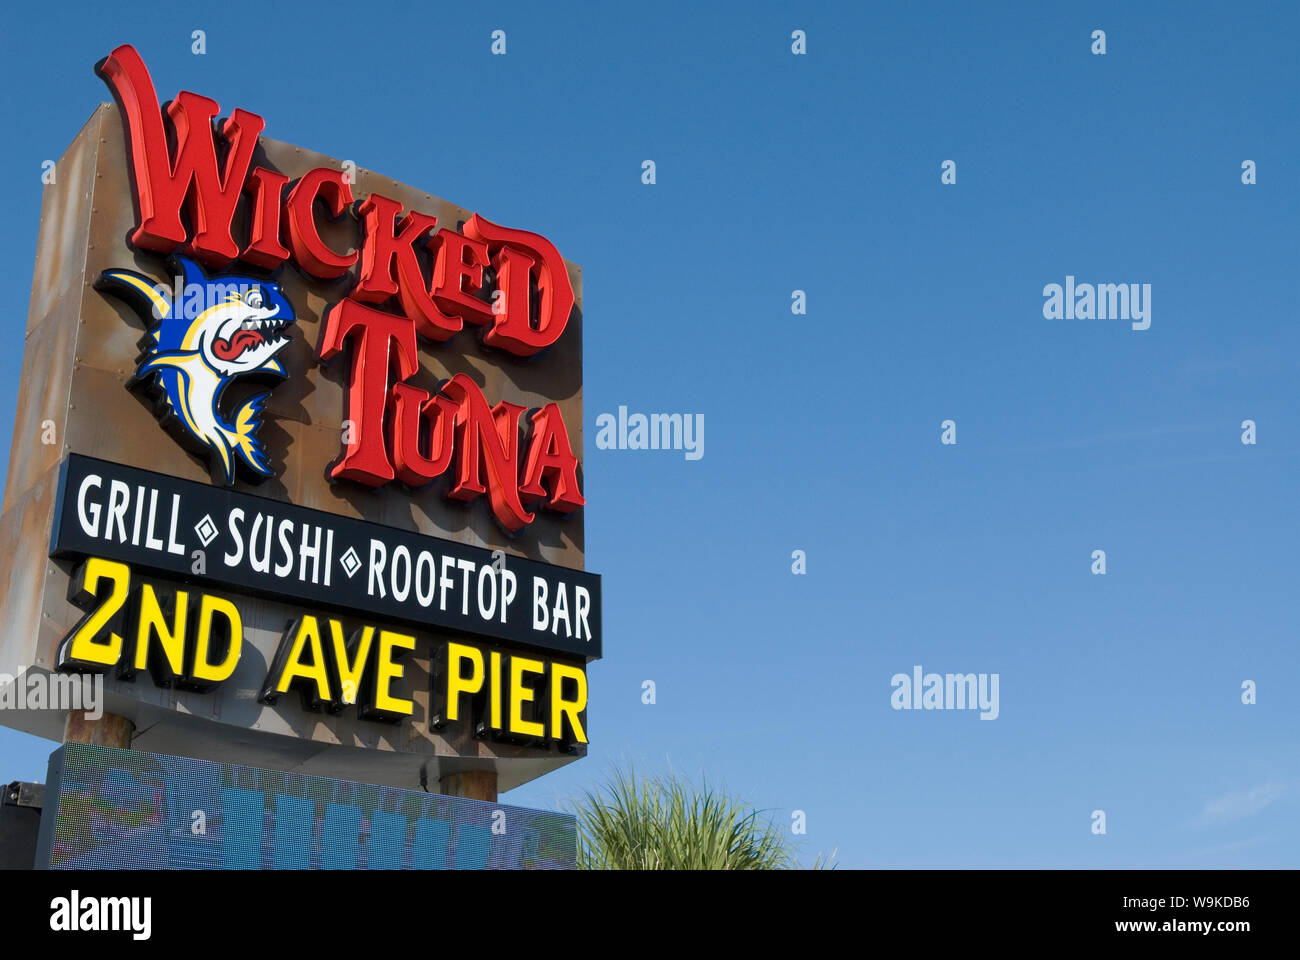 2nd Ave Pier & Wicked Tuna Restaurant sign at Myrtle Beach SC, USA. Stock Photo